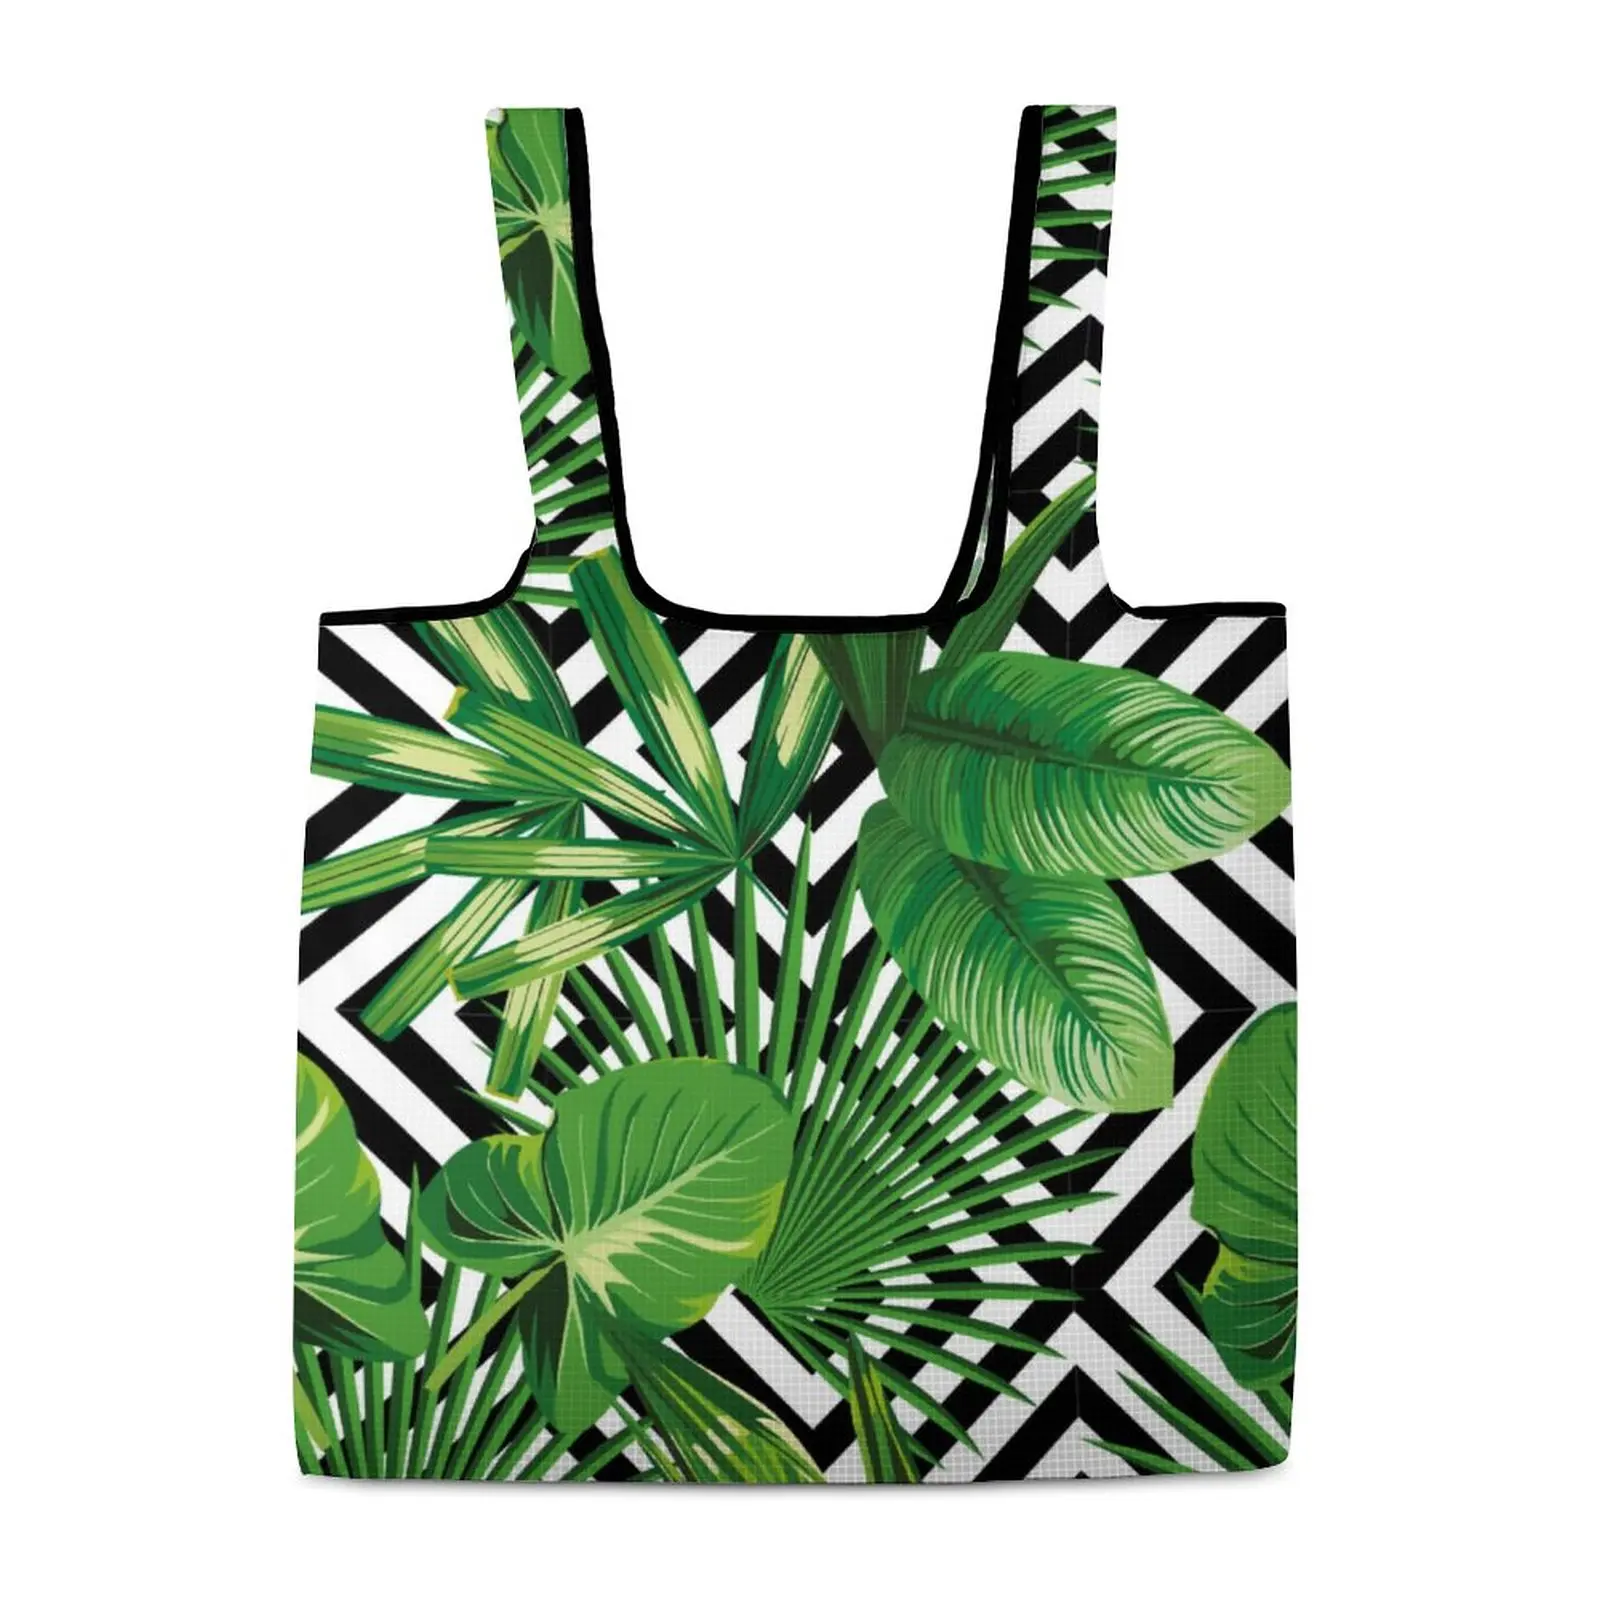 Black And White Striped Green Leaves Printed Portable Foldable Tote Bag Shopper Bag Washable Grocery Bag Customize Your Pattern